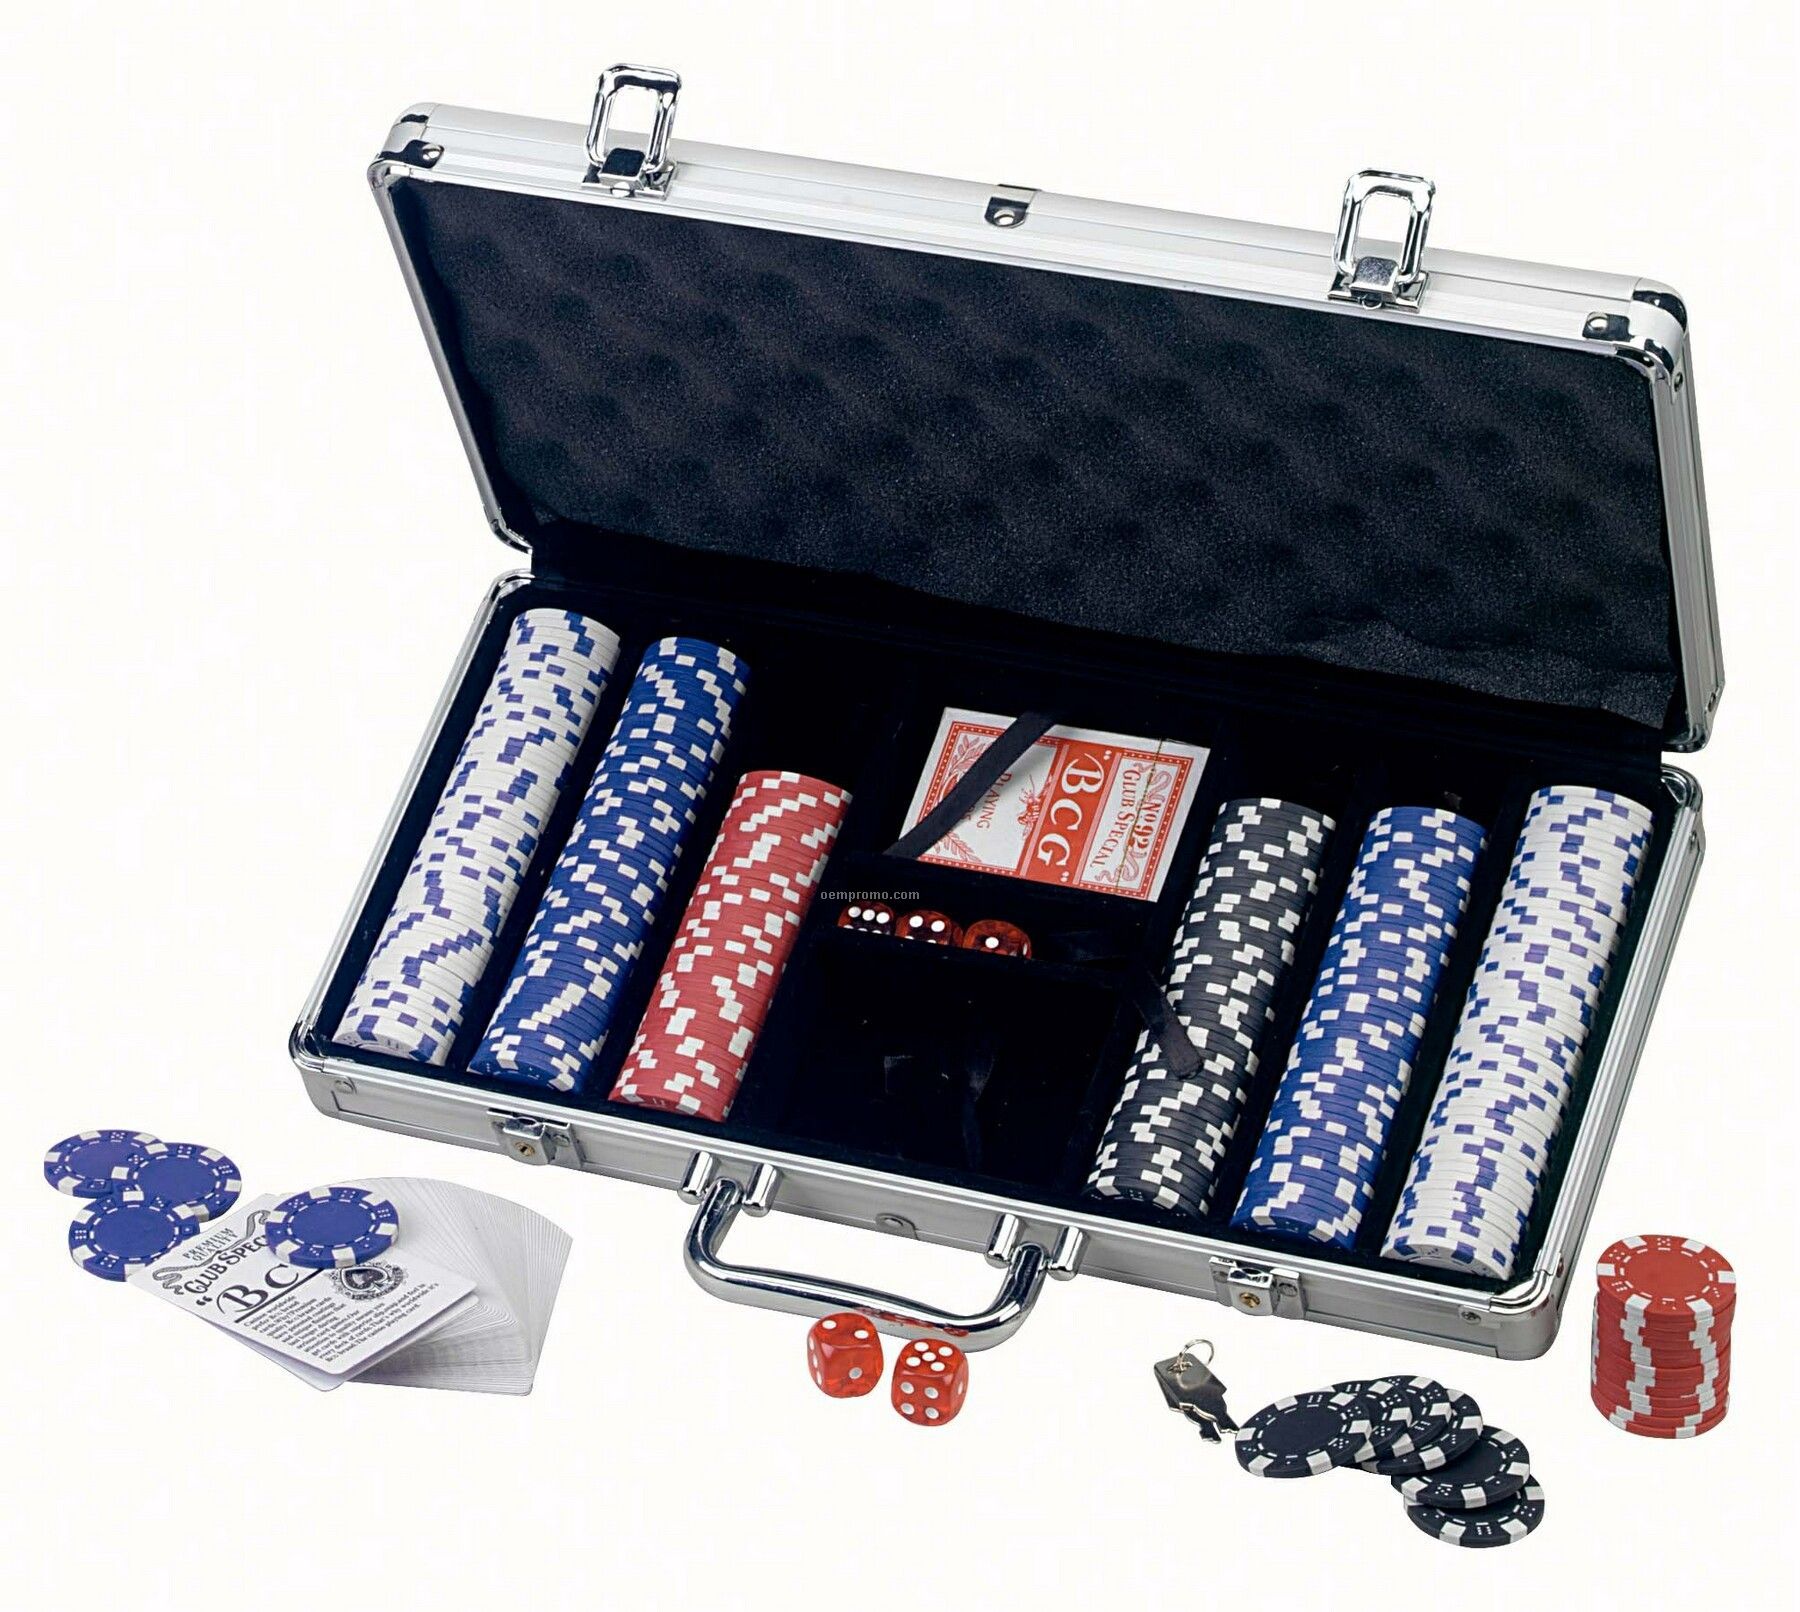 auditorium Groenland klap Action Line Deluxe Poker Set In Stainless Steel Case,China Wholesale Action  Line Deluxe Poker Set In Stainless Steel Case